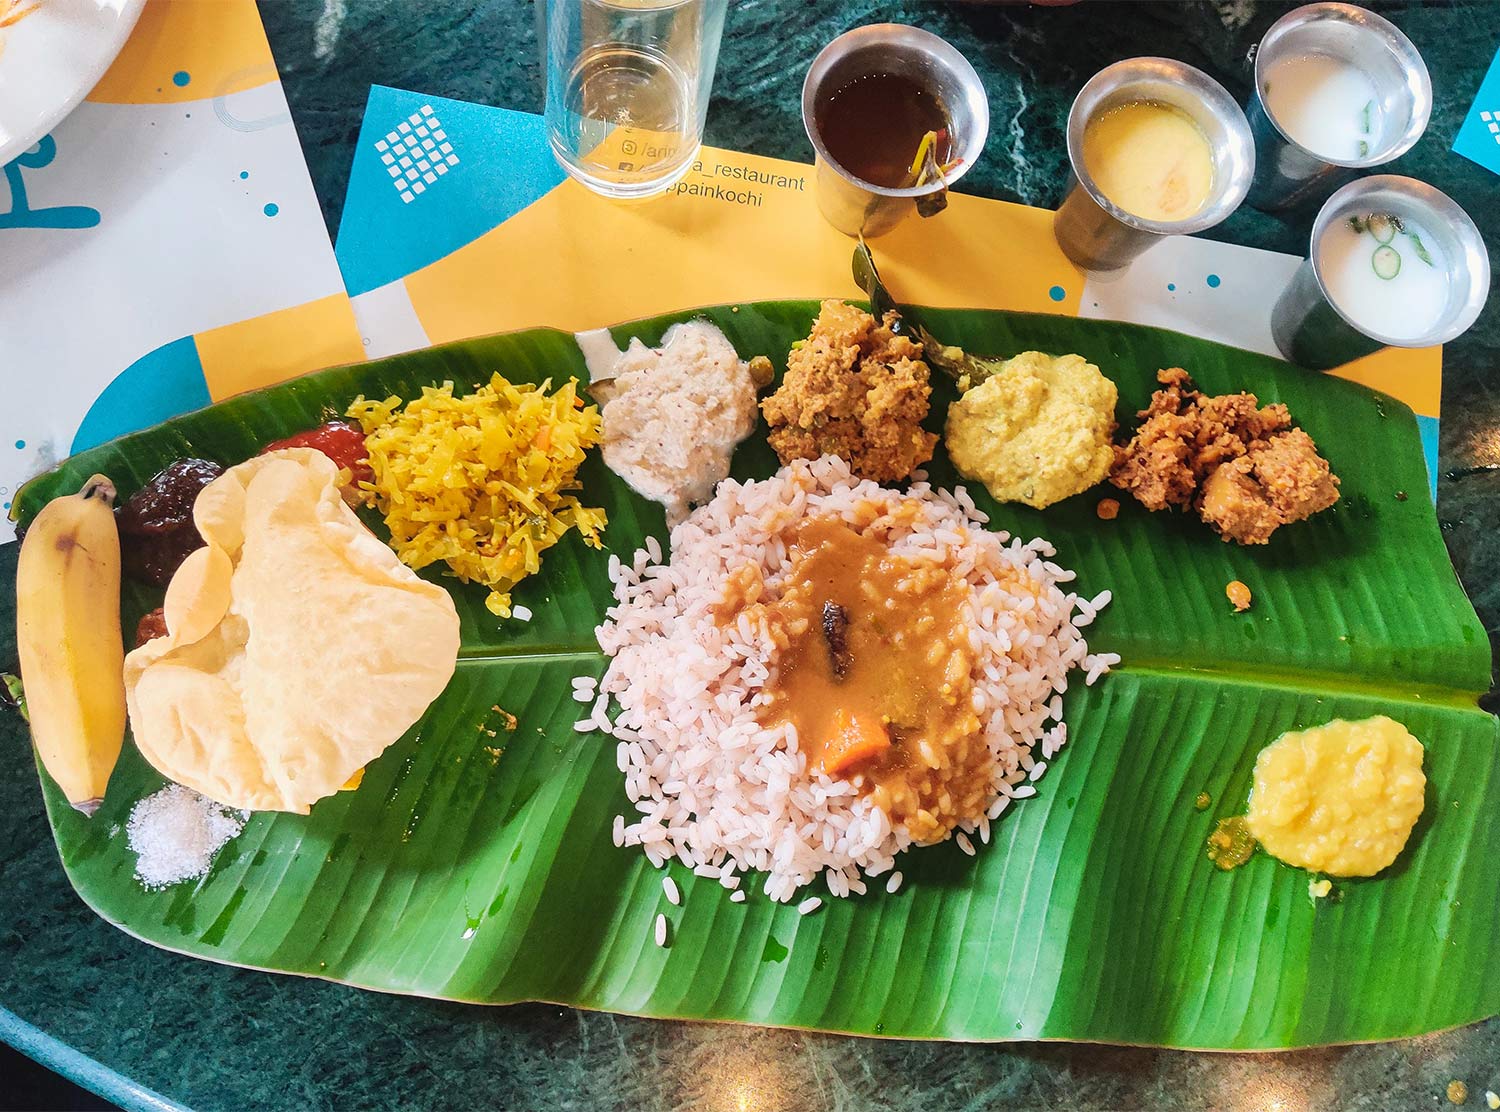 Kerala's signature vegetarian meal served on a plantain leaf. Photo by Supreeth Suresh